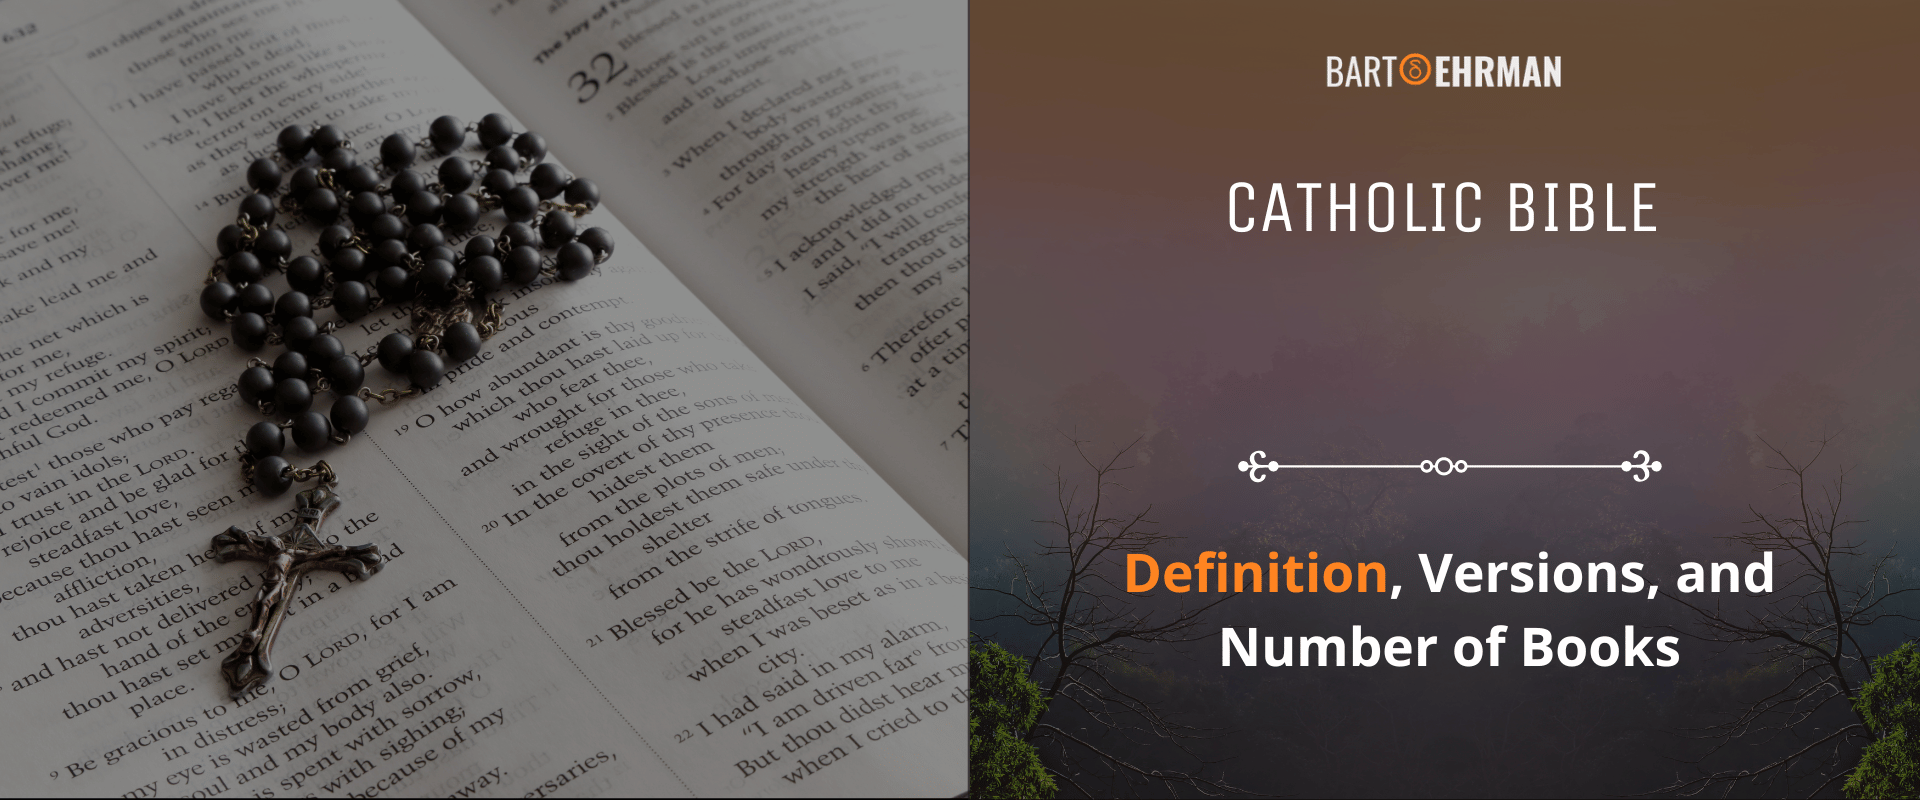 Catholic Bible - Definition, Versions, and Number of Books